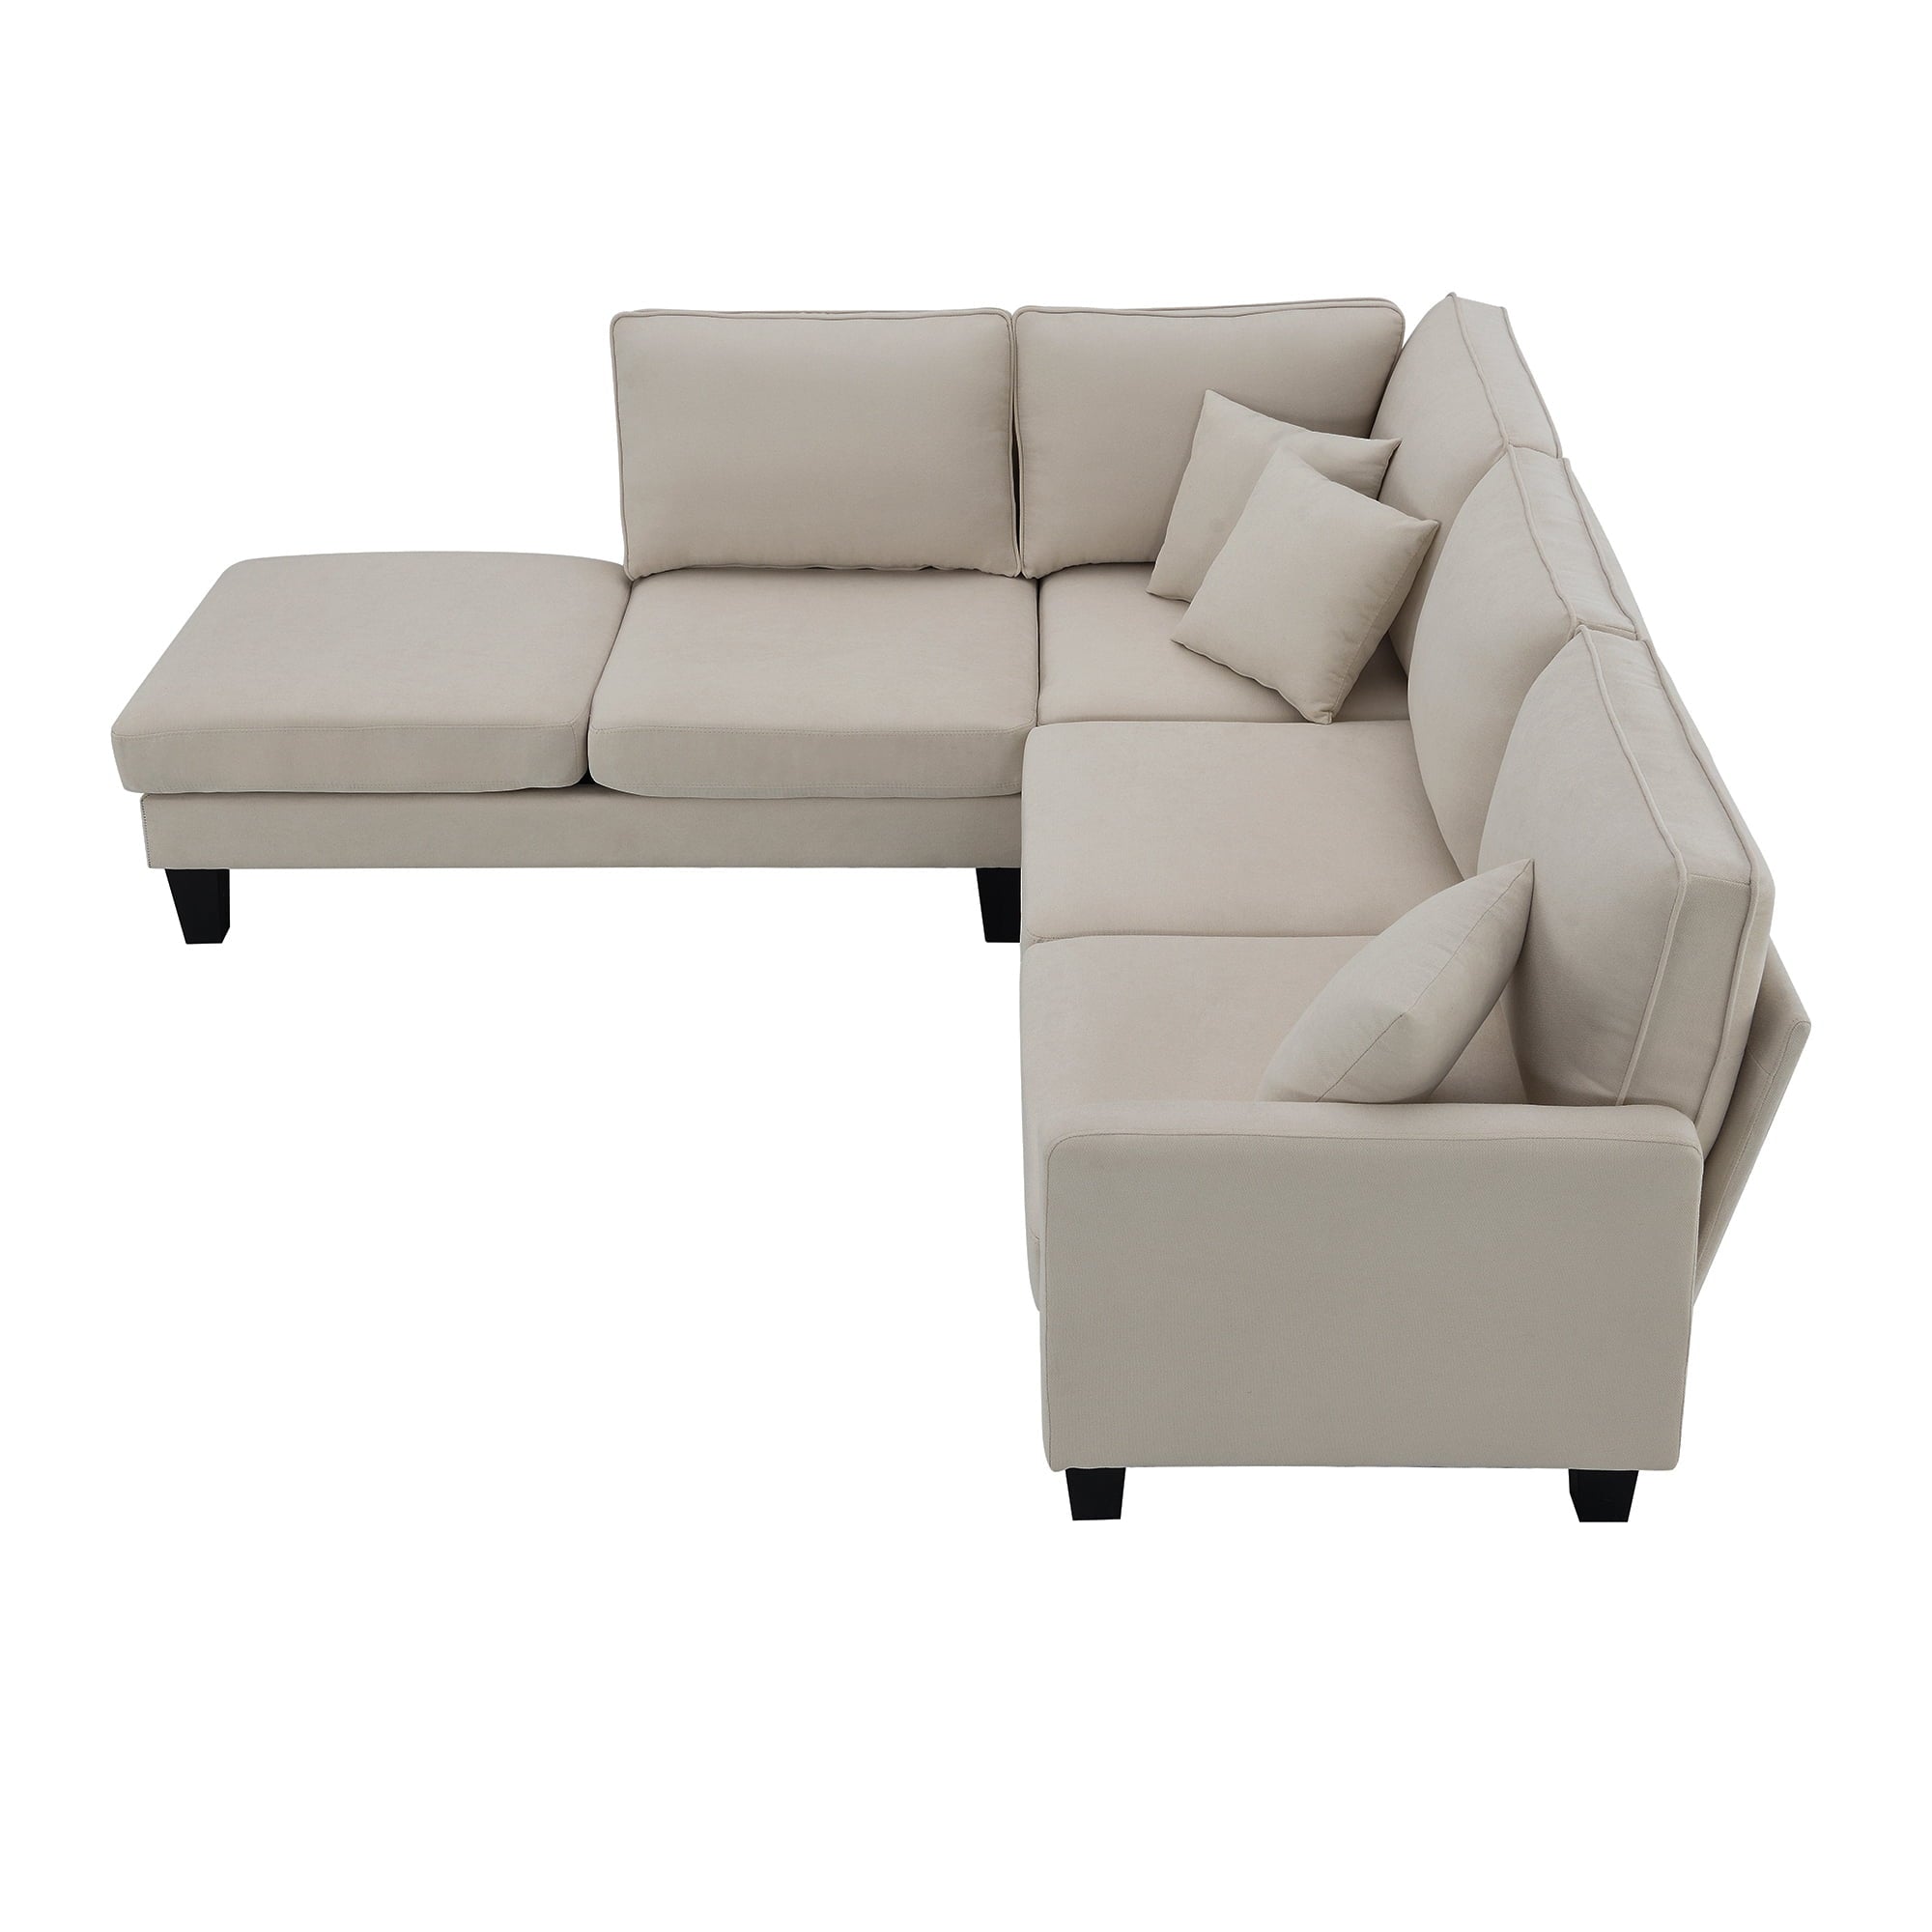 Up To 60% Off Sofas and Futons